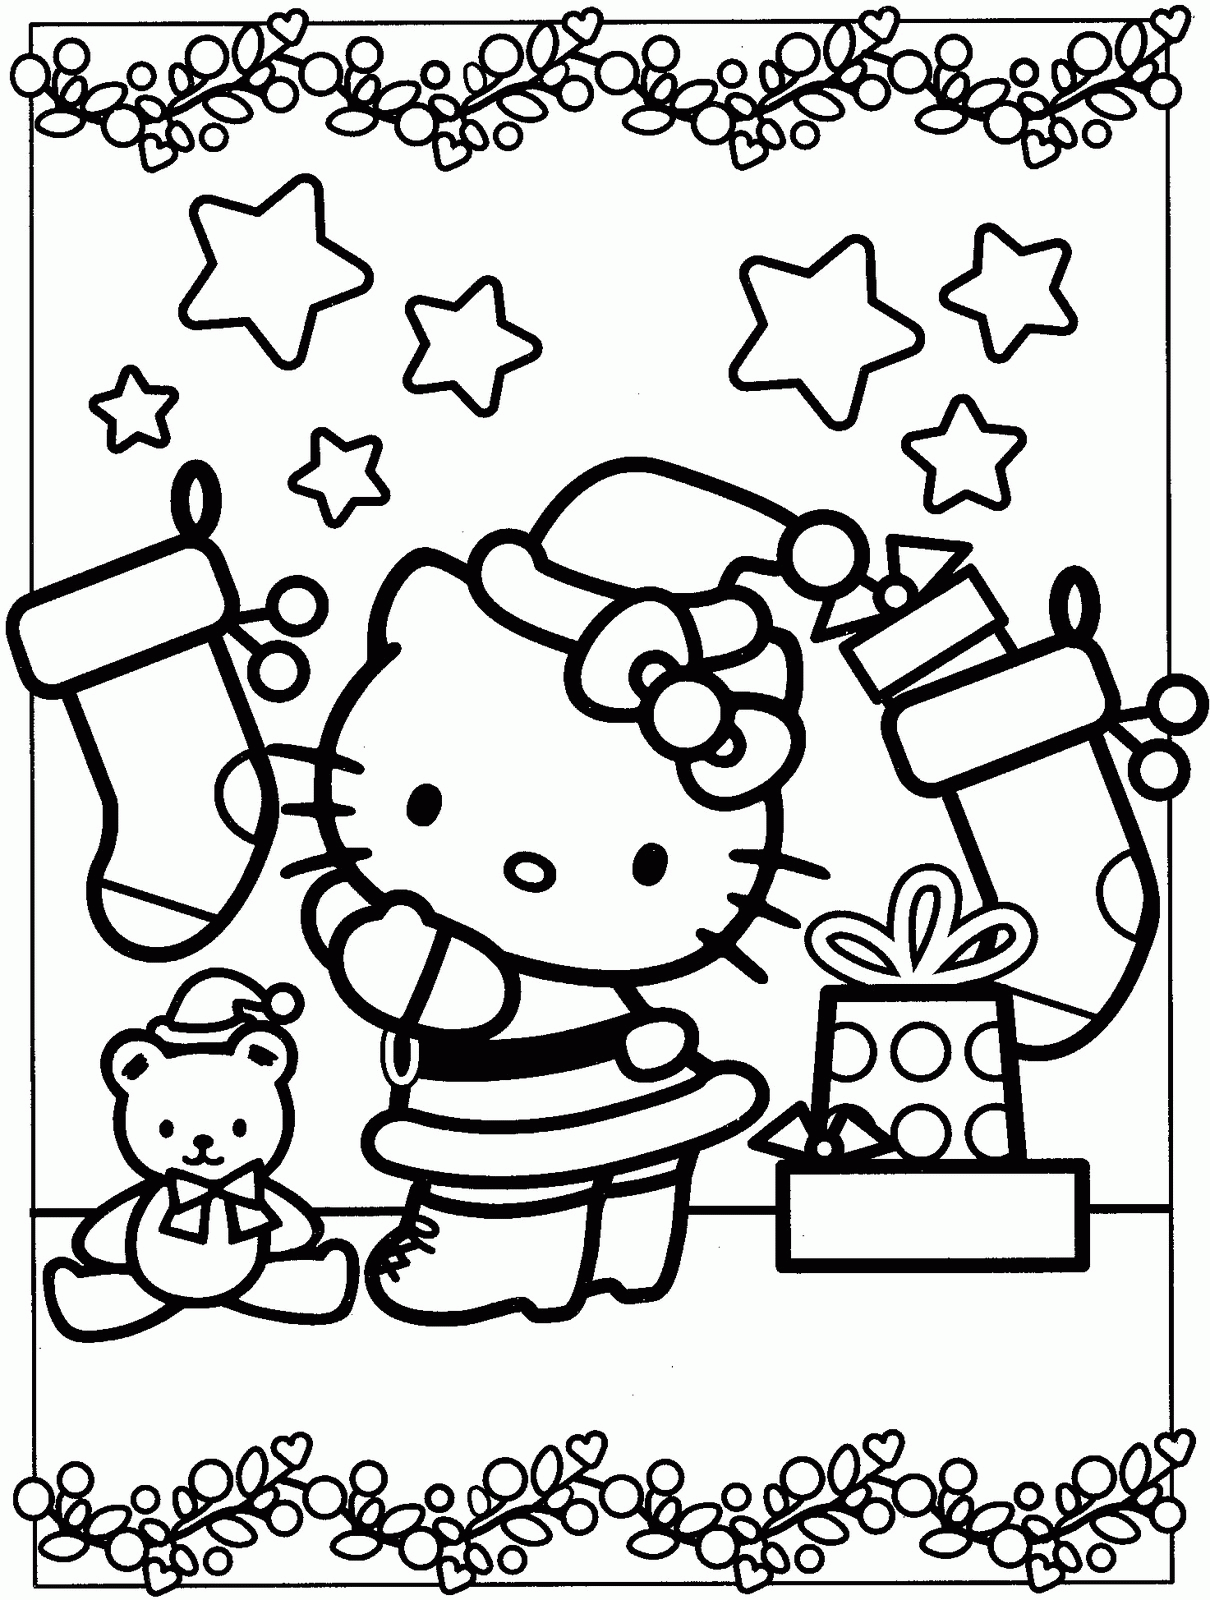 Christmas Coloring Pages Hello Kitty - Coloring Pages For All Ages